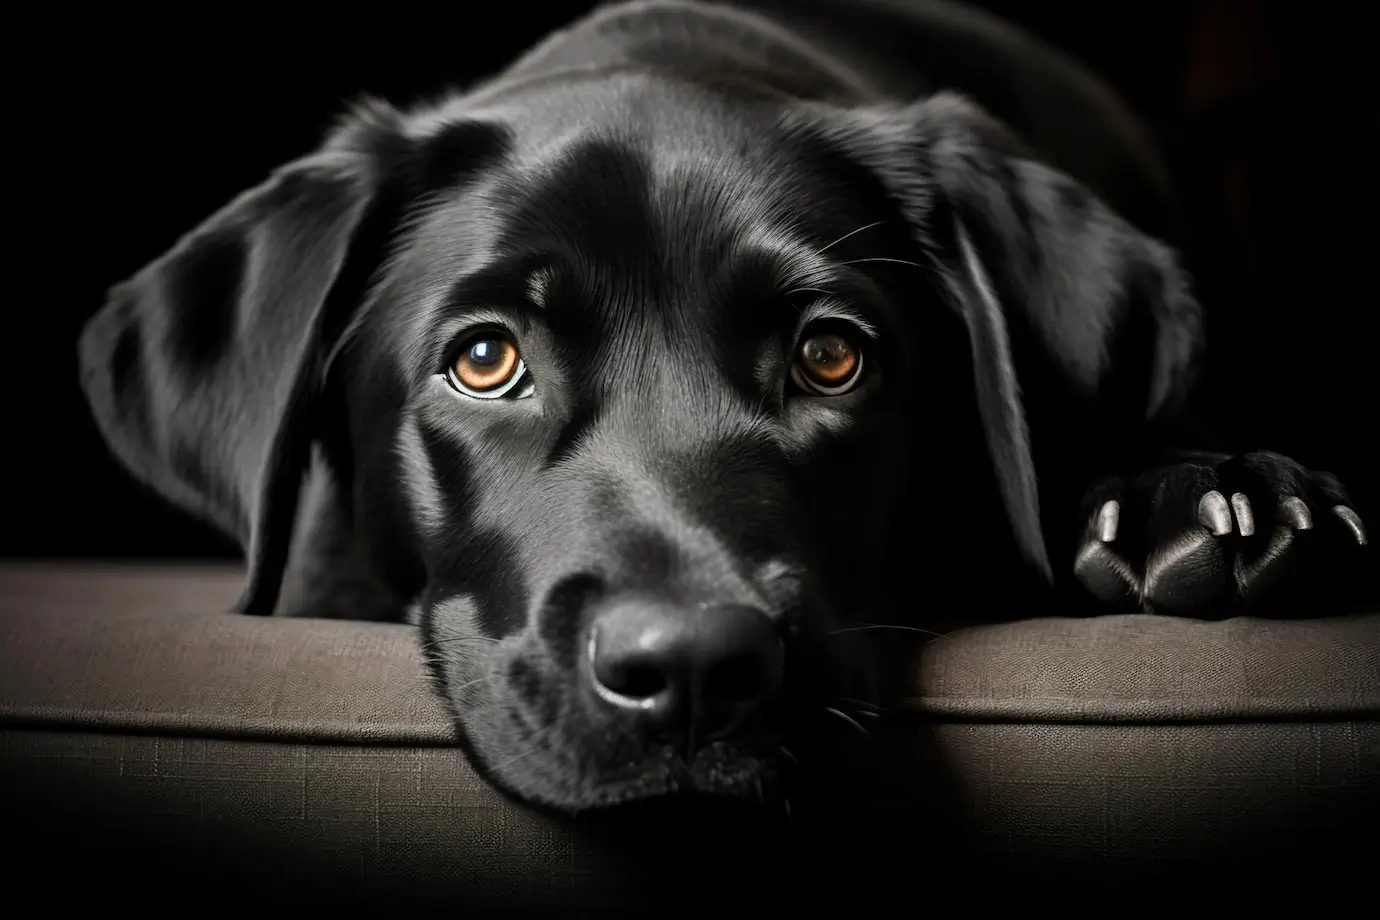 National Black Dog Day: When It Is and What It Means